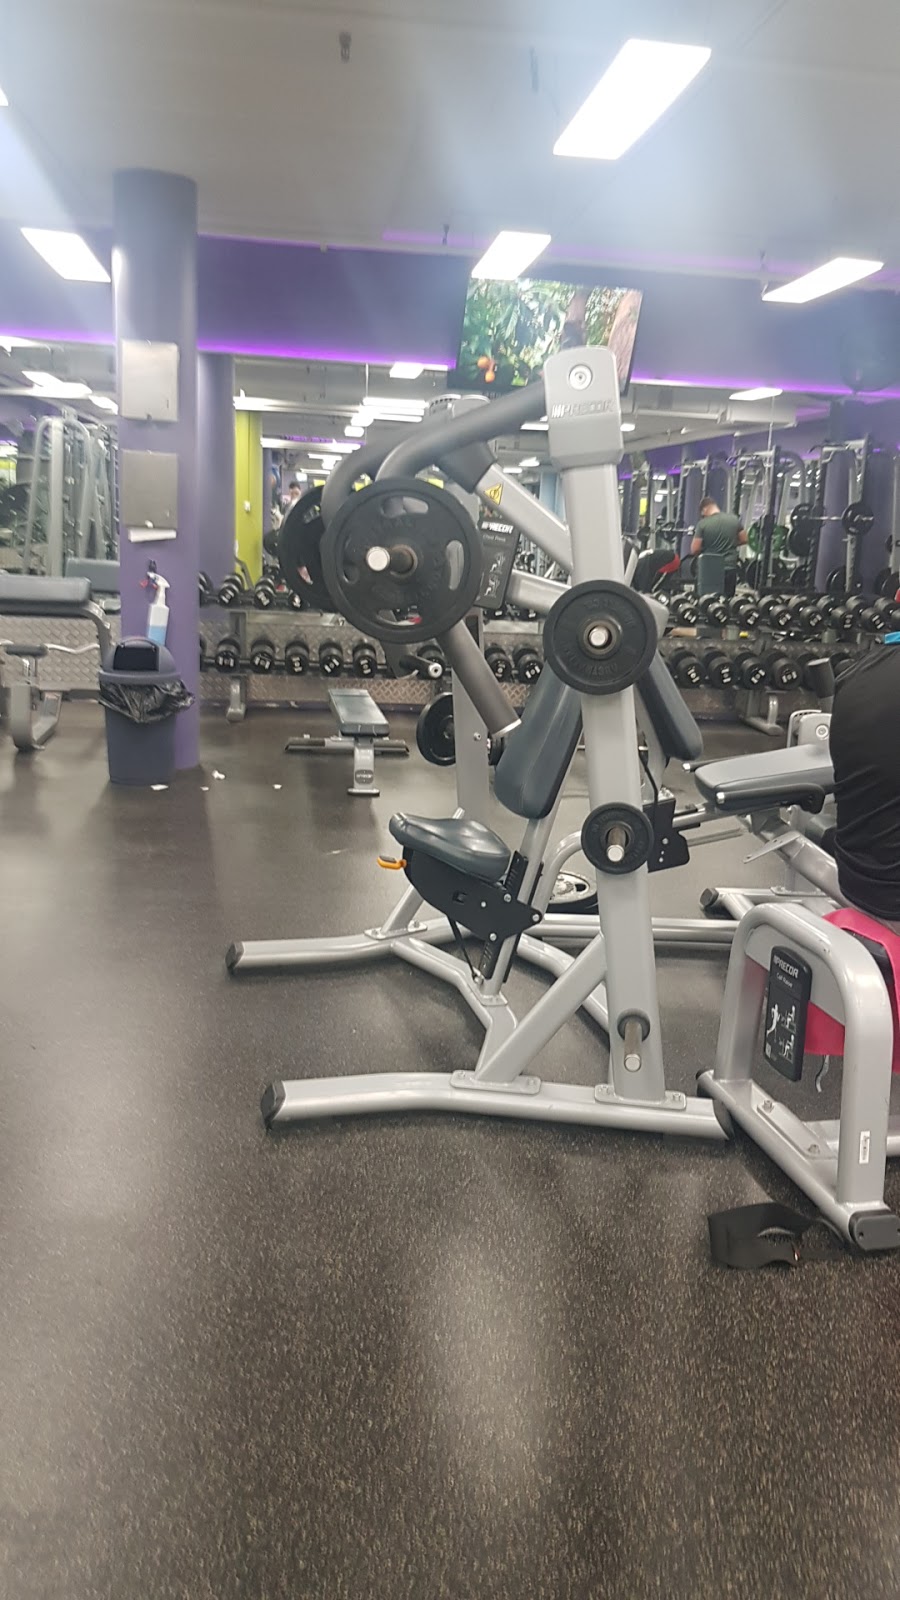 Anytime Fitness | gym | 12/14 Withers Rd, Kellyville NSW 2155, Australia | 0434415459 OR +61 434 415 459